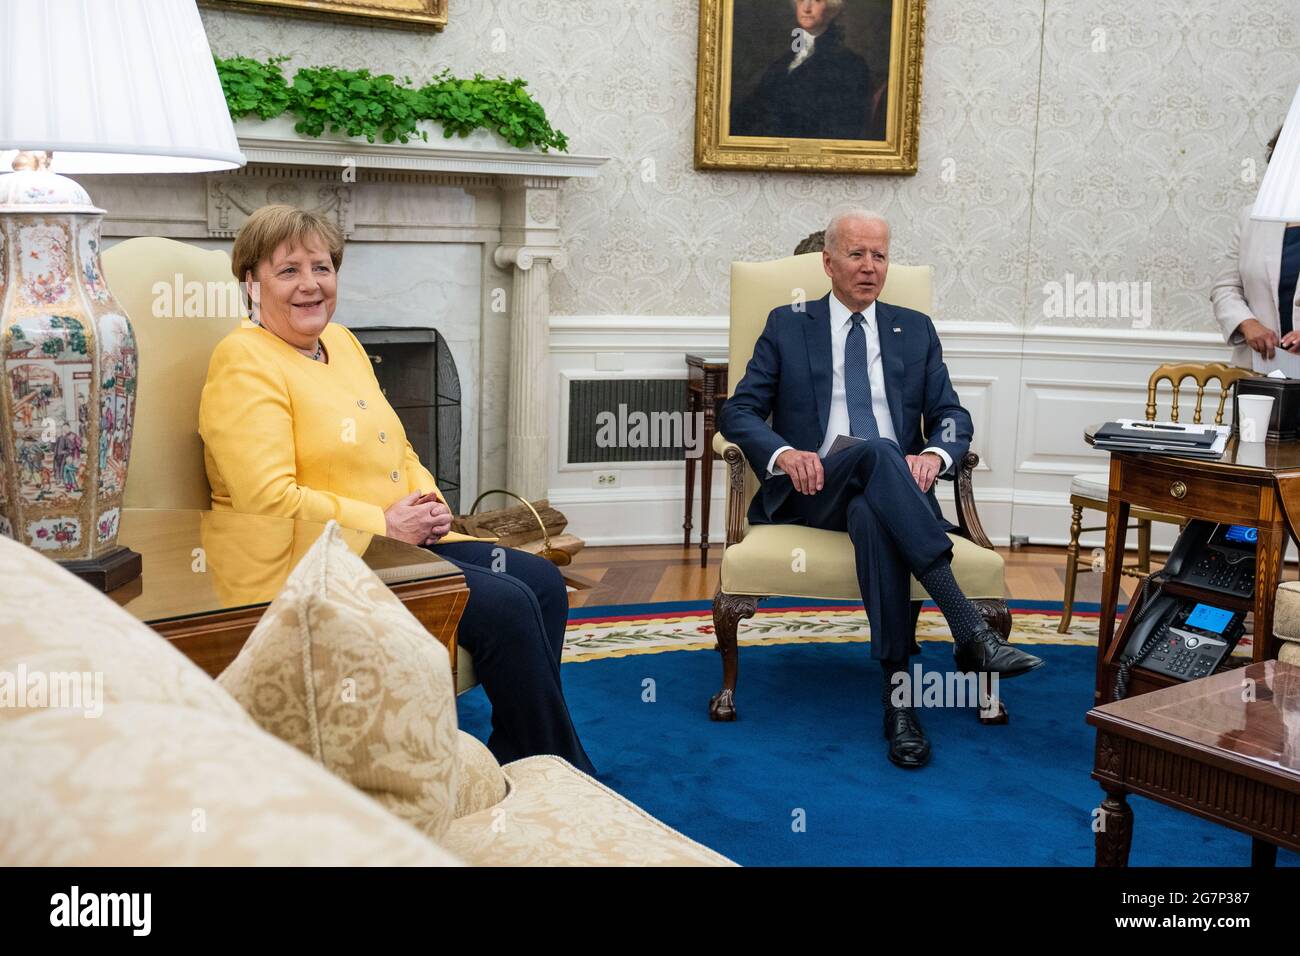 United States President Joe Biden, left, meets Chancellor Dr. Angela Merkel of Germany on the Oval Office of the White House in Washington, DC on Thursday, July 15, 2021. Credit: Doug Mills/Pool via CNP /MediaPunch Stock Photo